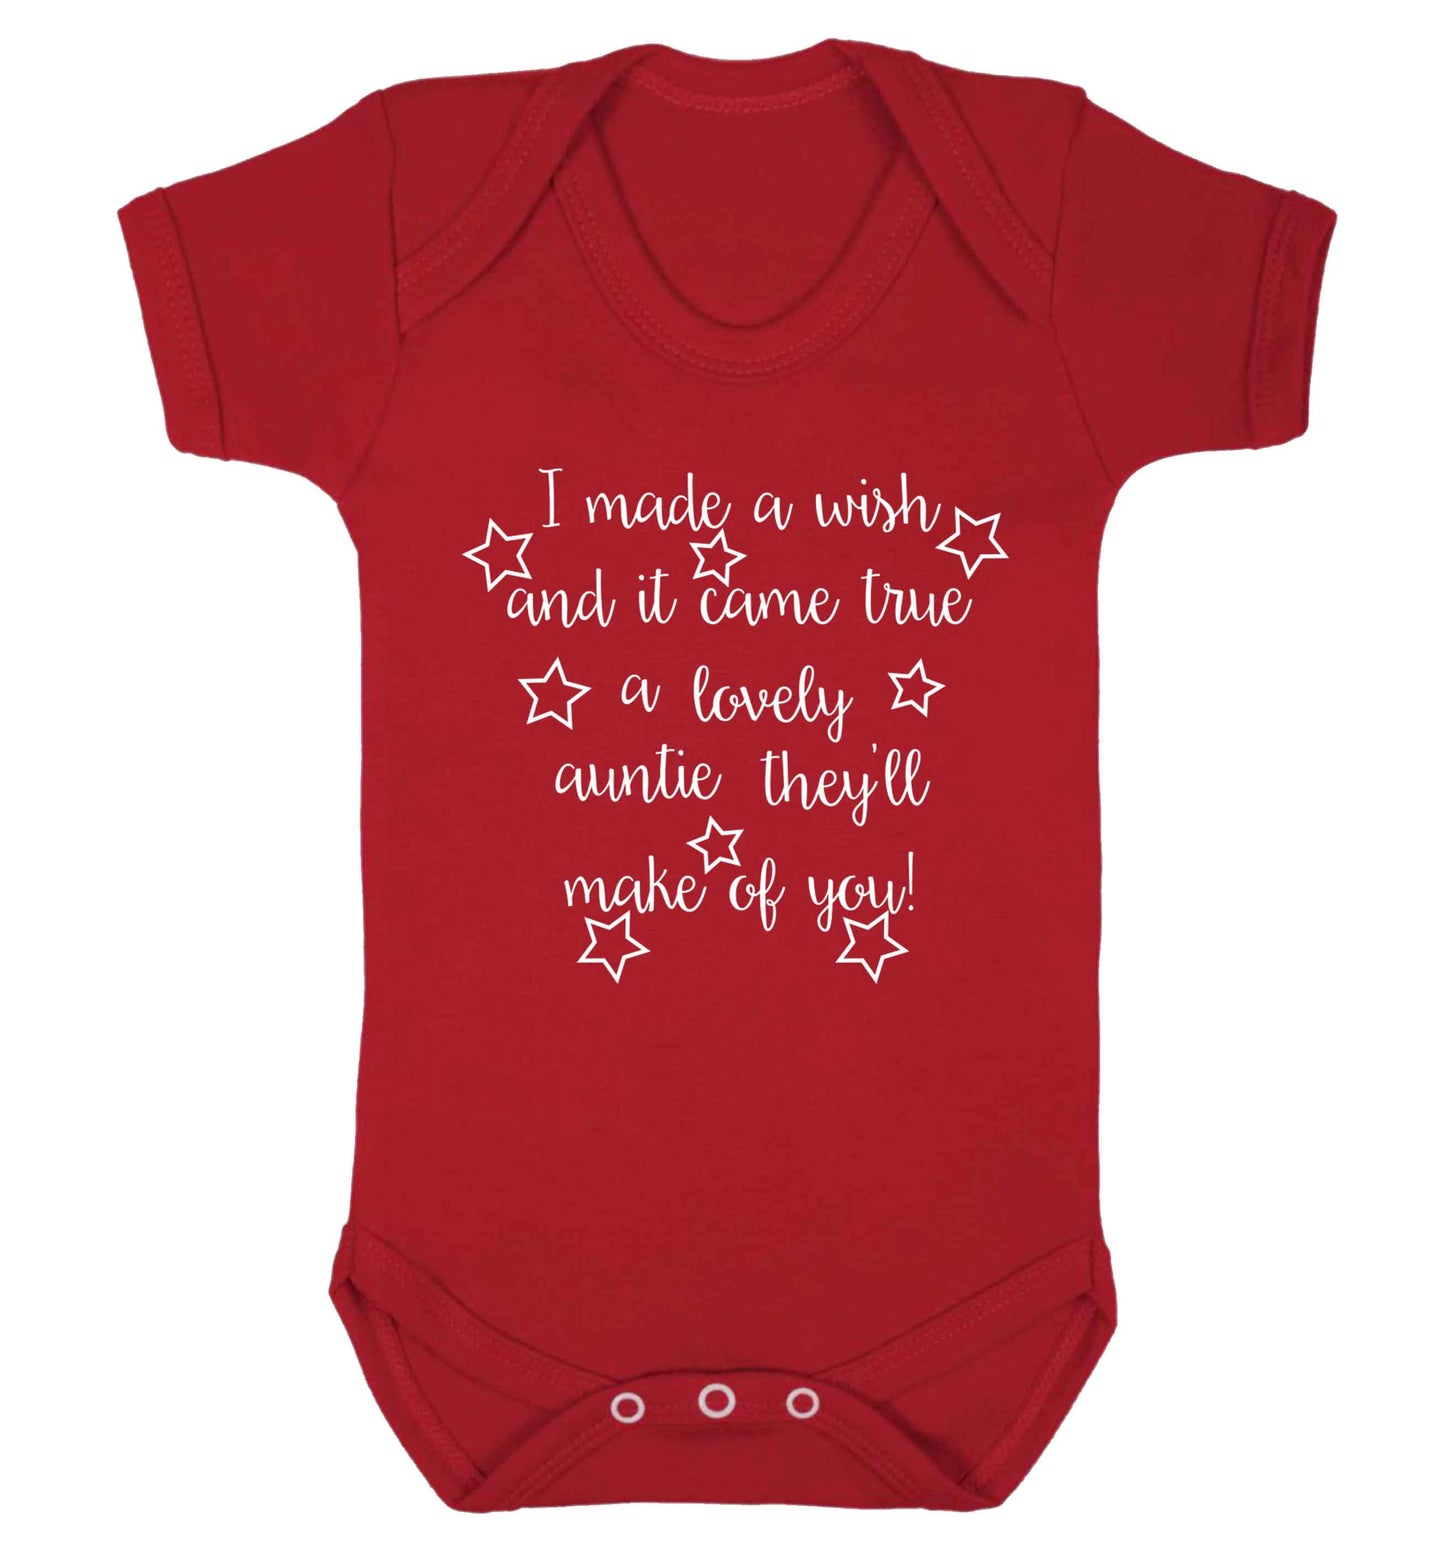 I made a wish and it came true a lovely auntie they'll make of you! Baby Vest red 18-24 months